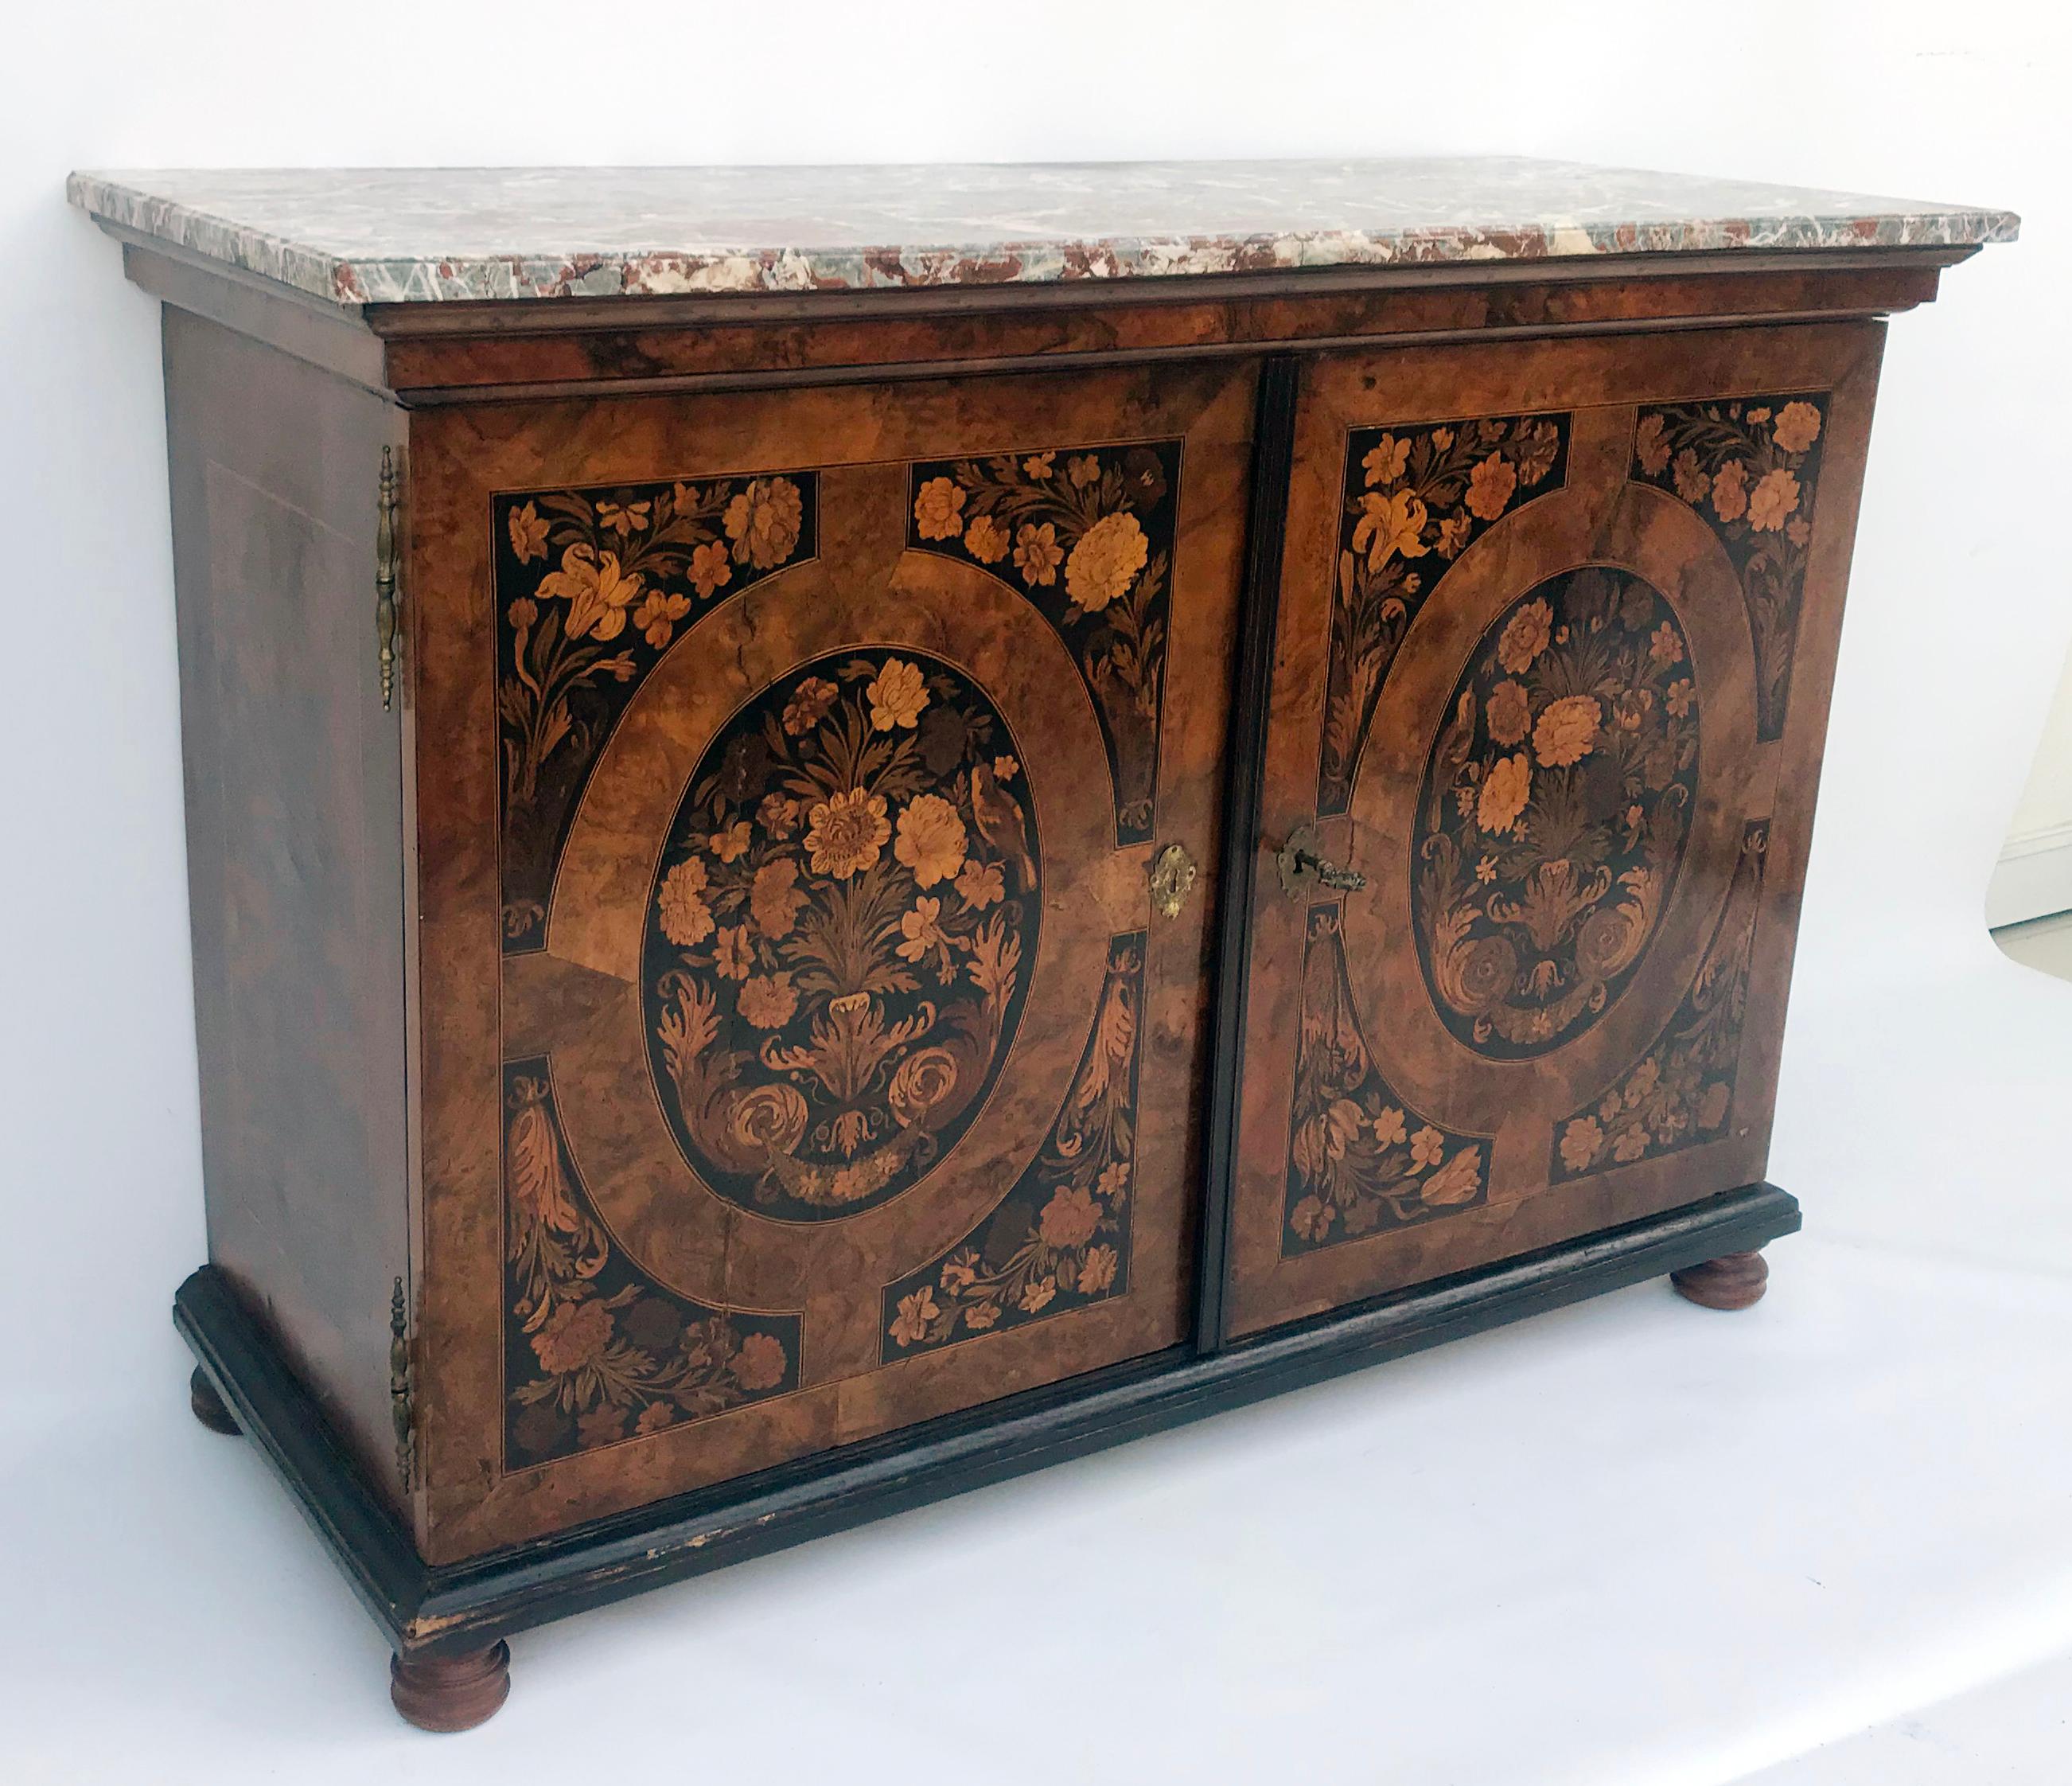 French Attributed to Thomas Hache, Baroque Sideboard, Grenoble, France, 1740s